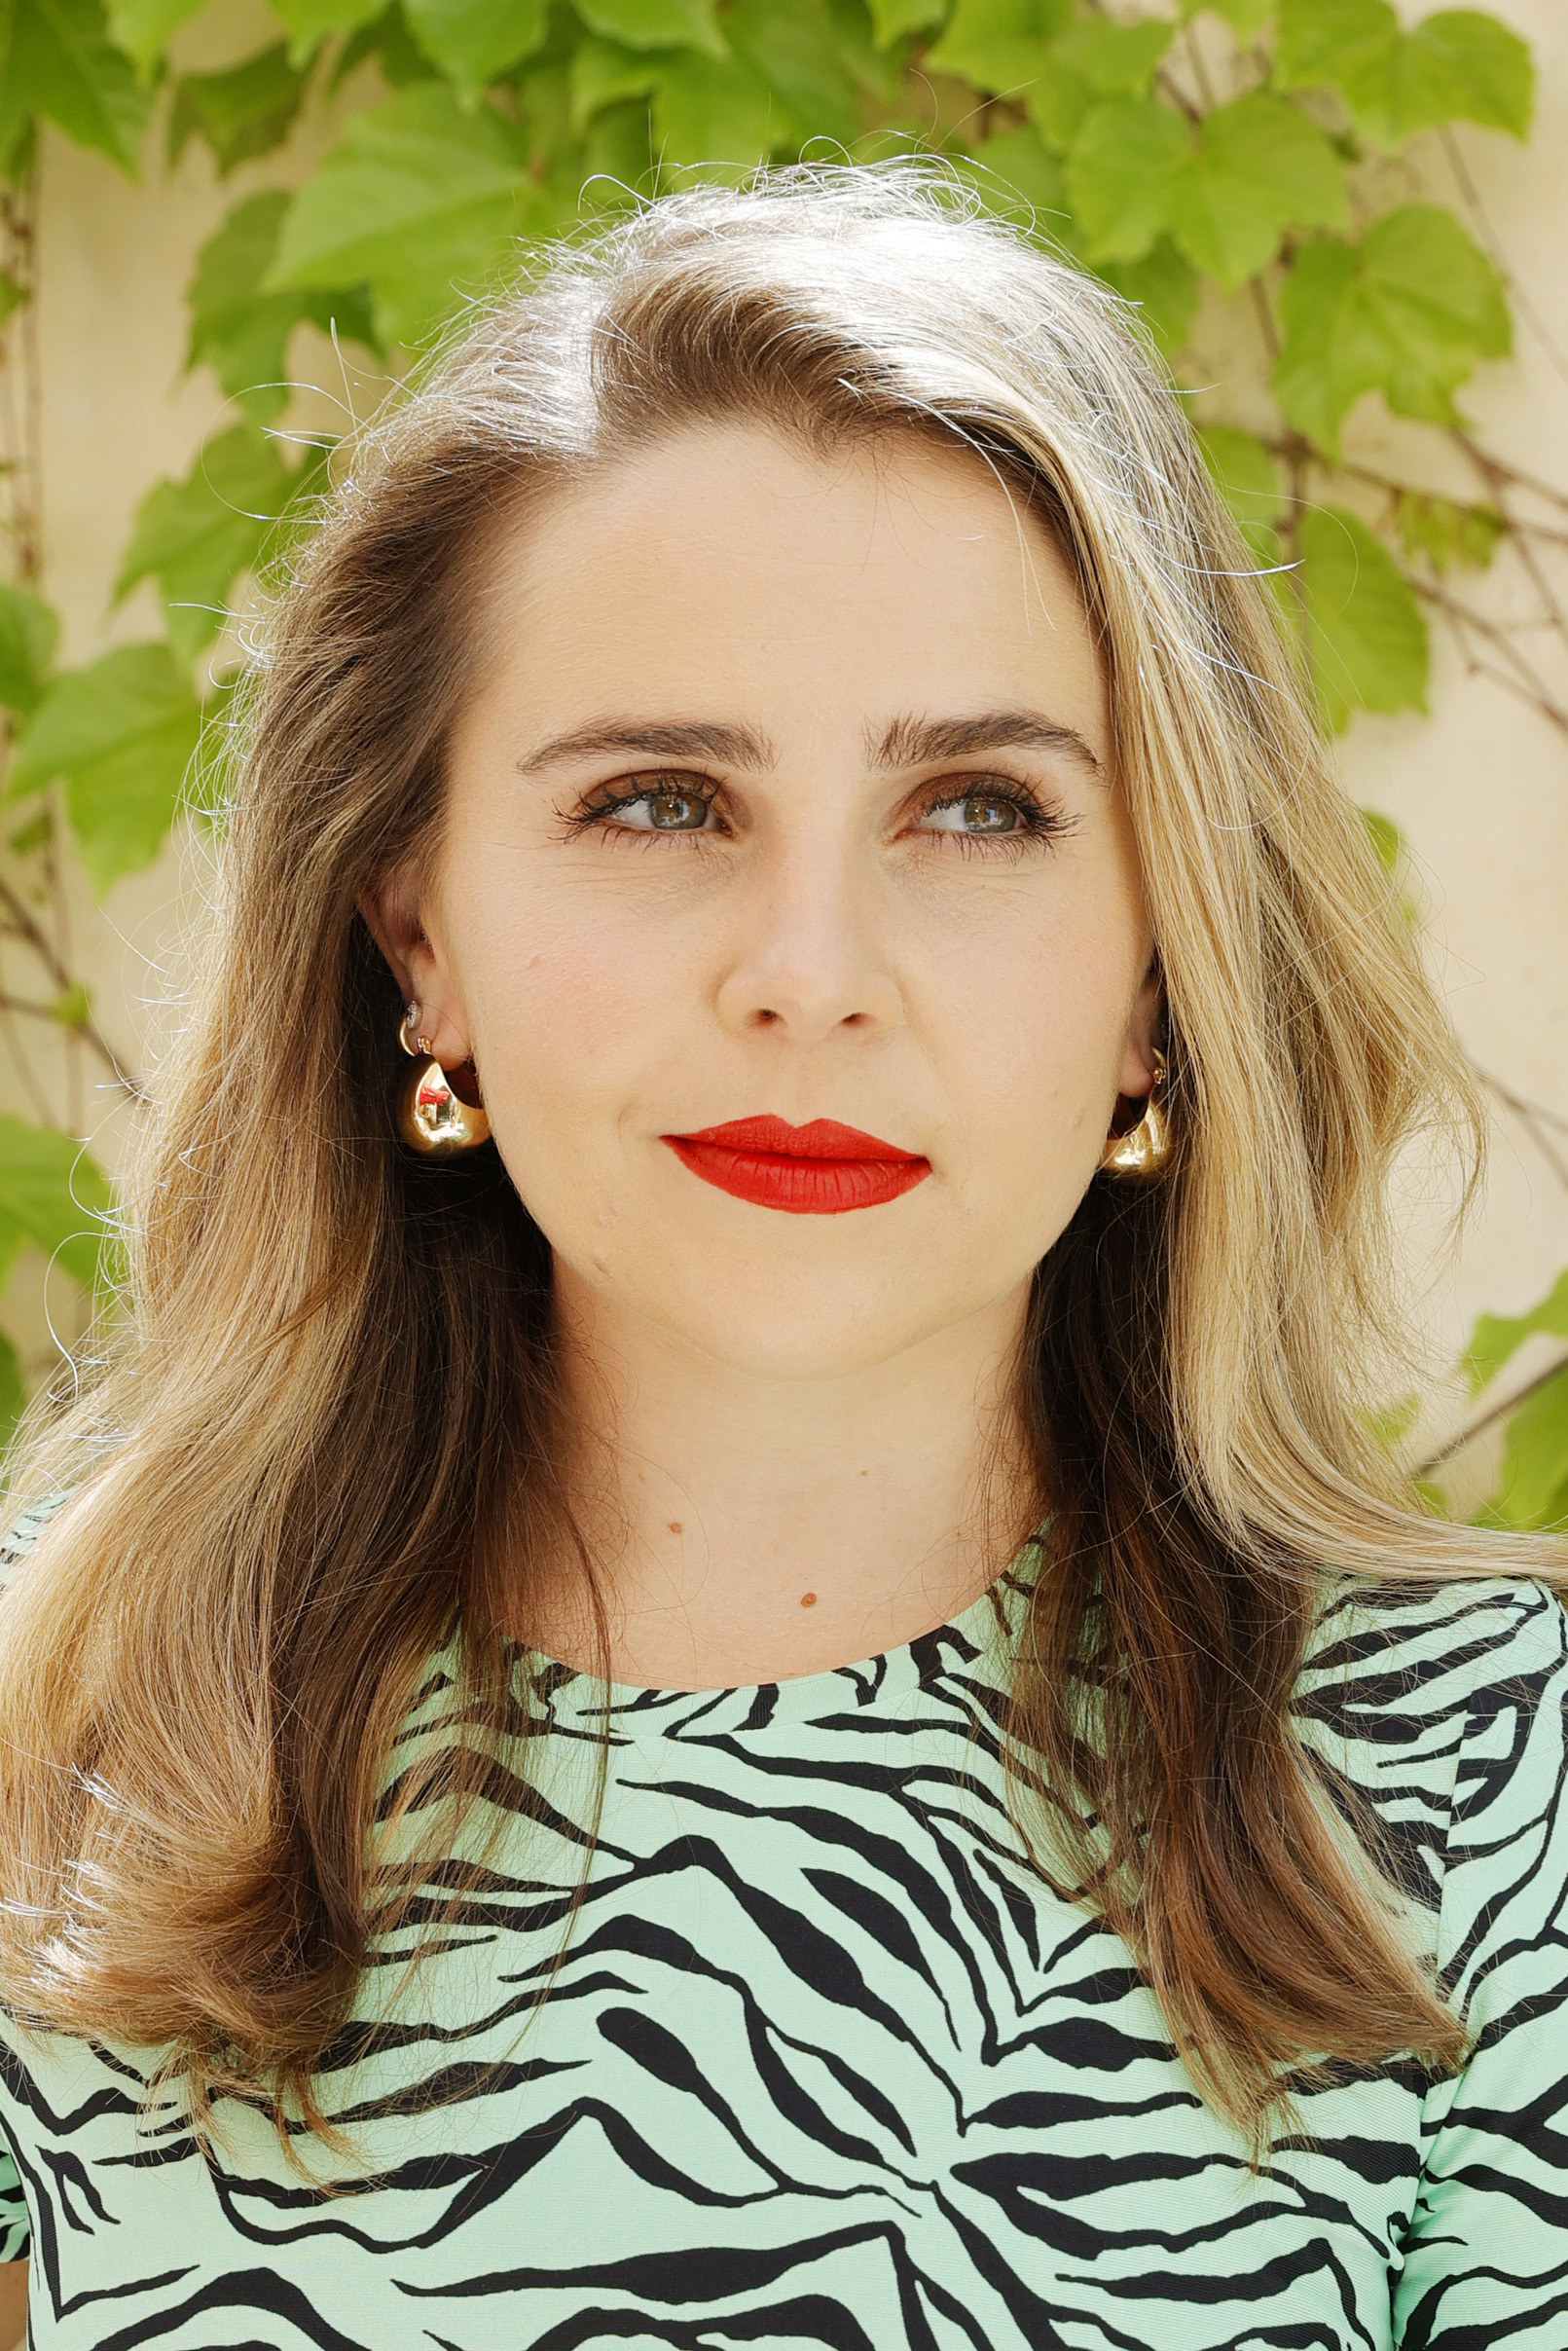 Mae Whitman wearing a mint green zebra print shirt, with red lipstick and gold hoops